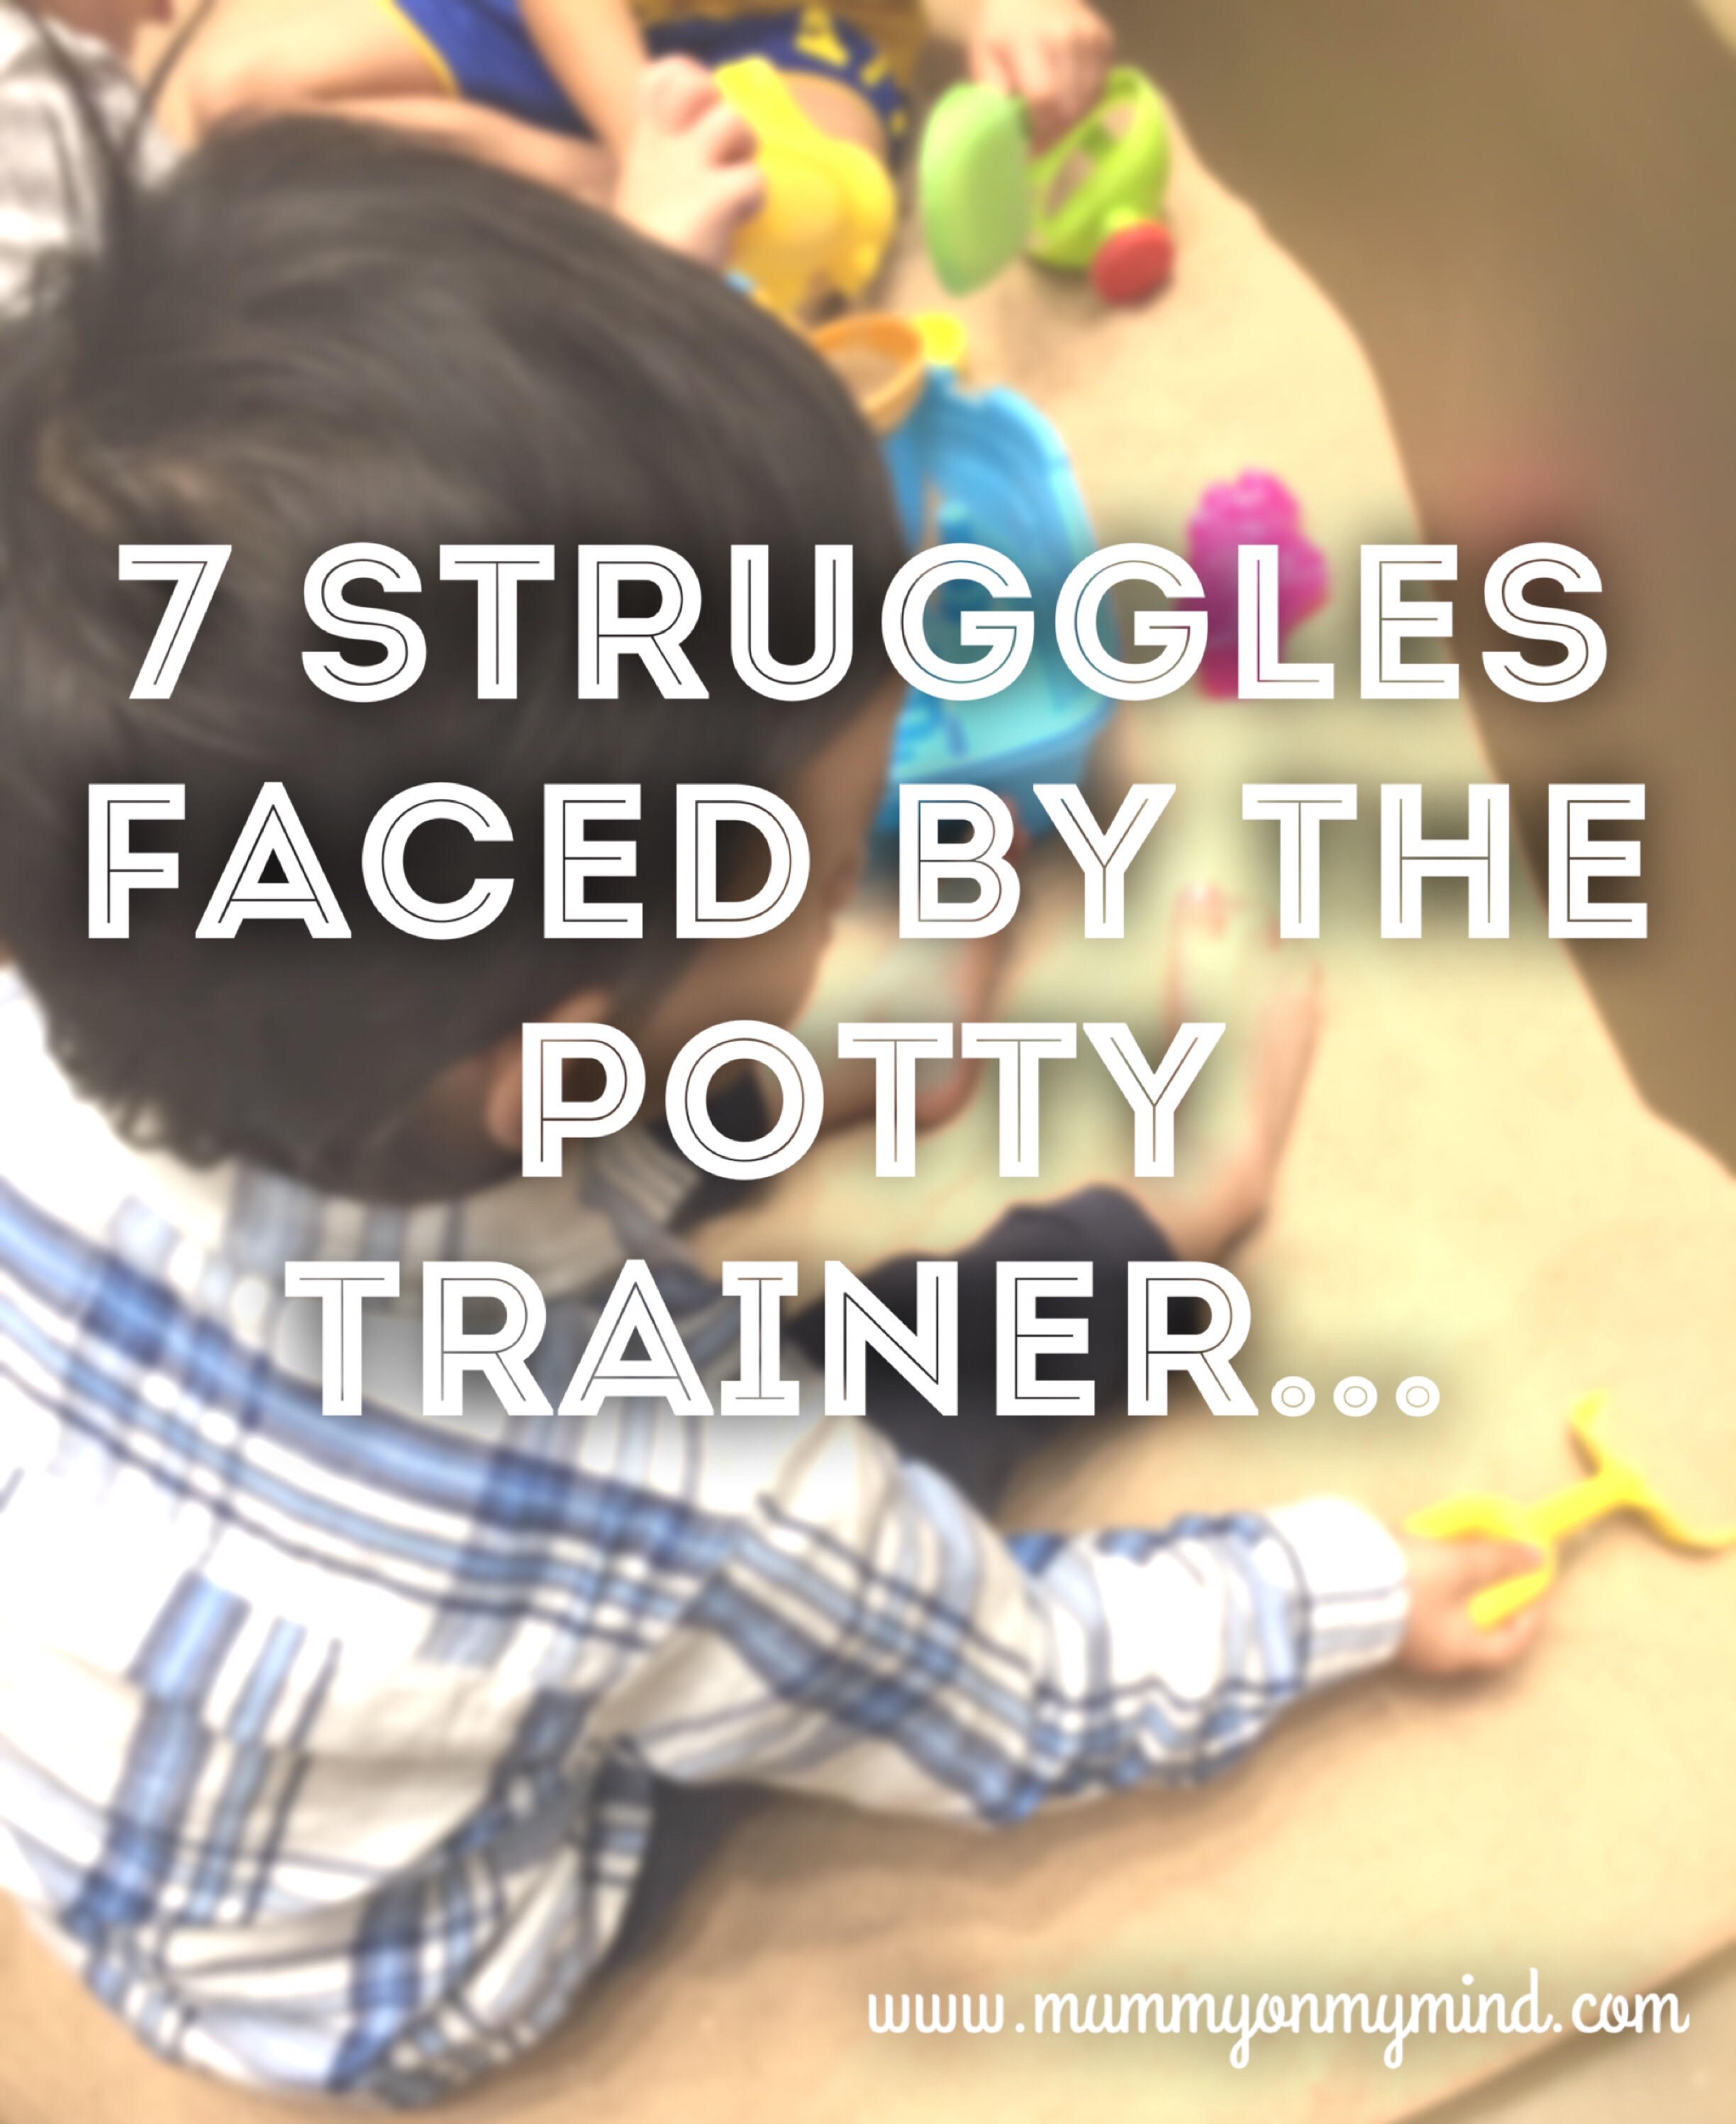 Seven Struggles faced by the Potty Trainer…